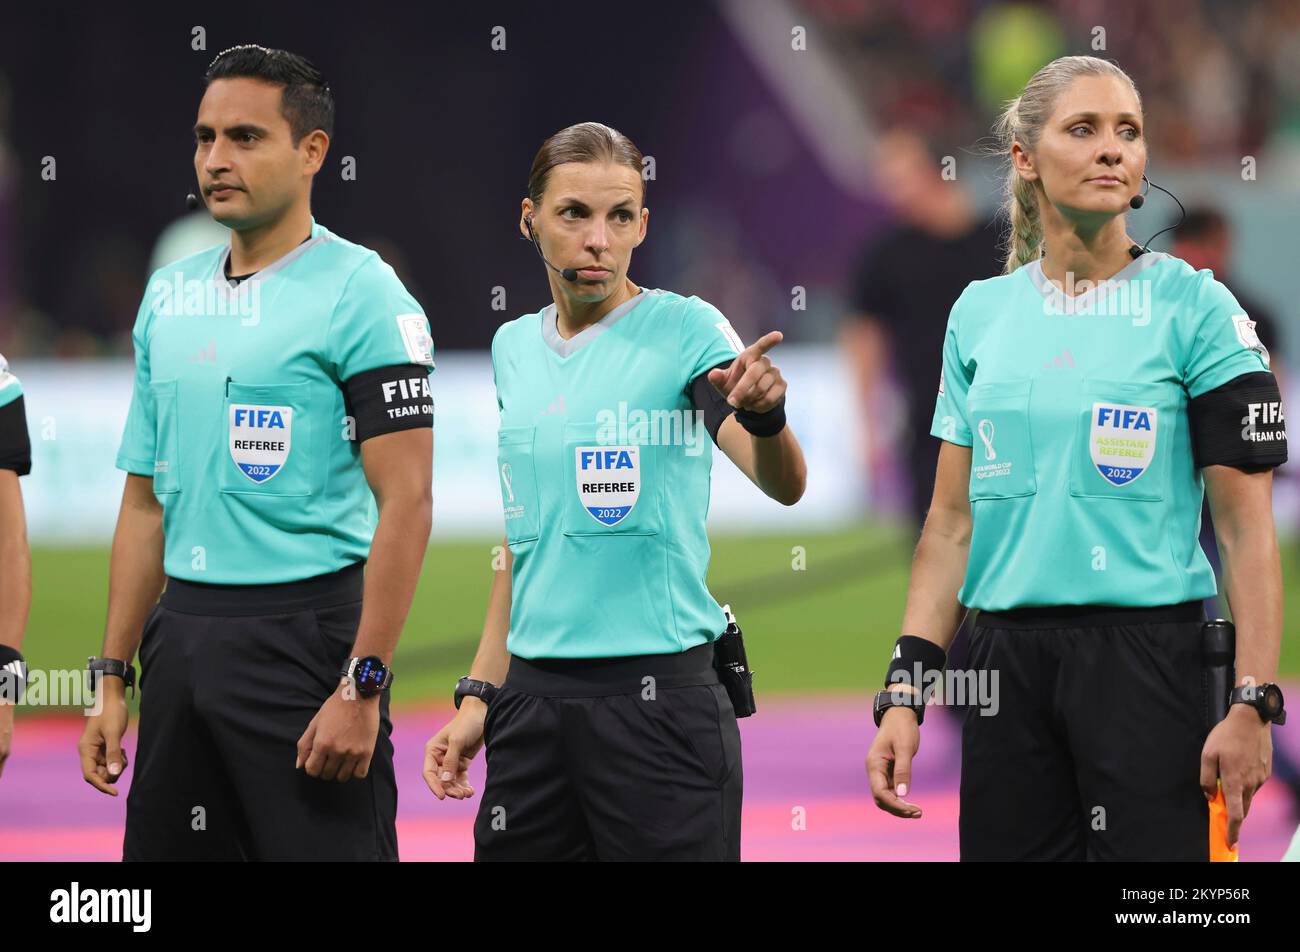 Qatar, 01.12.2022 Football, Soccer, FIFA WORLD CUP 2022 QATAR, World Cup 2022 Qatar, World Cup 2022 Qatar, Group stage, Group E, Match Costa Rica - Germany 1:1 referee Stéphanie Frappart (France) (withte referee assistant referee assistant Neuza Ines Back (Brazil) right Stock Photo